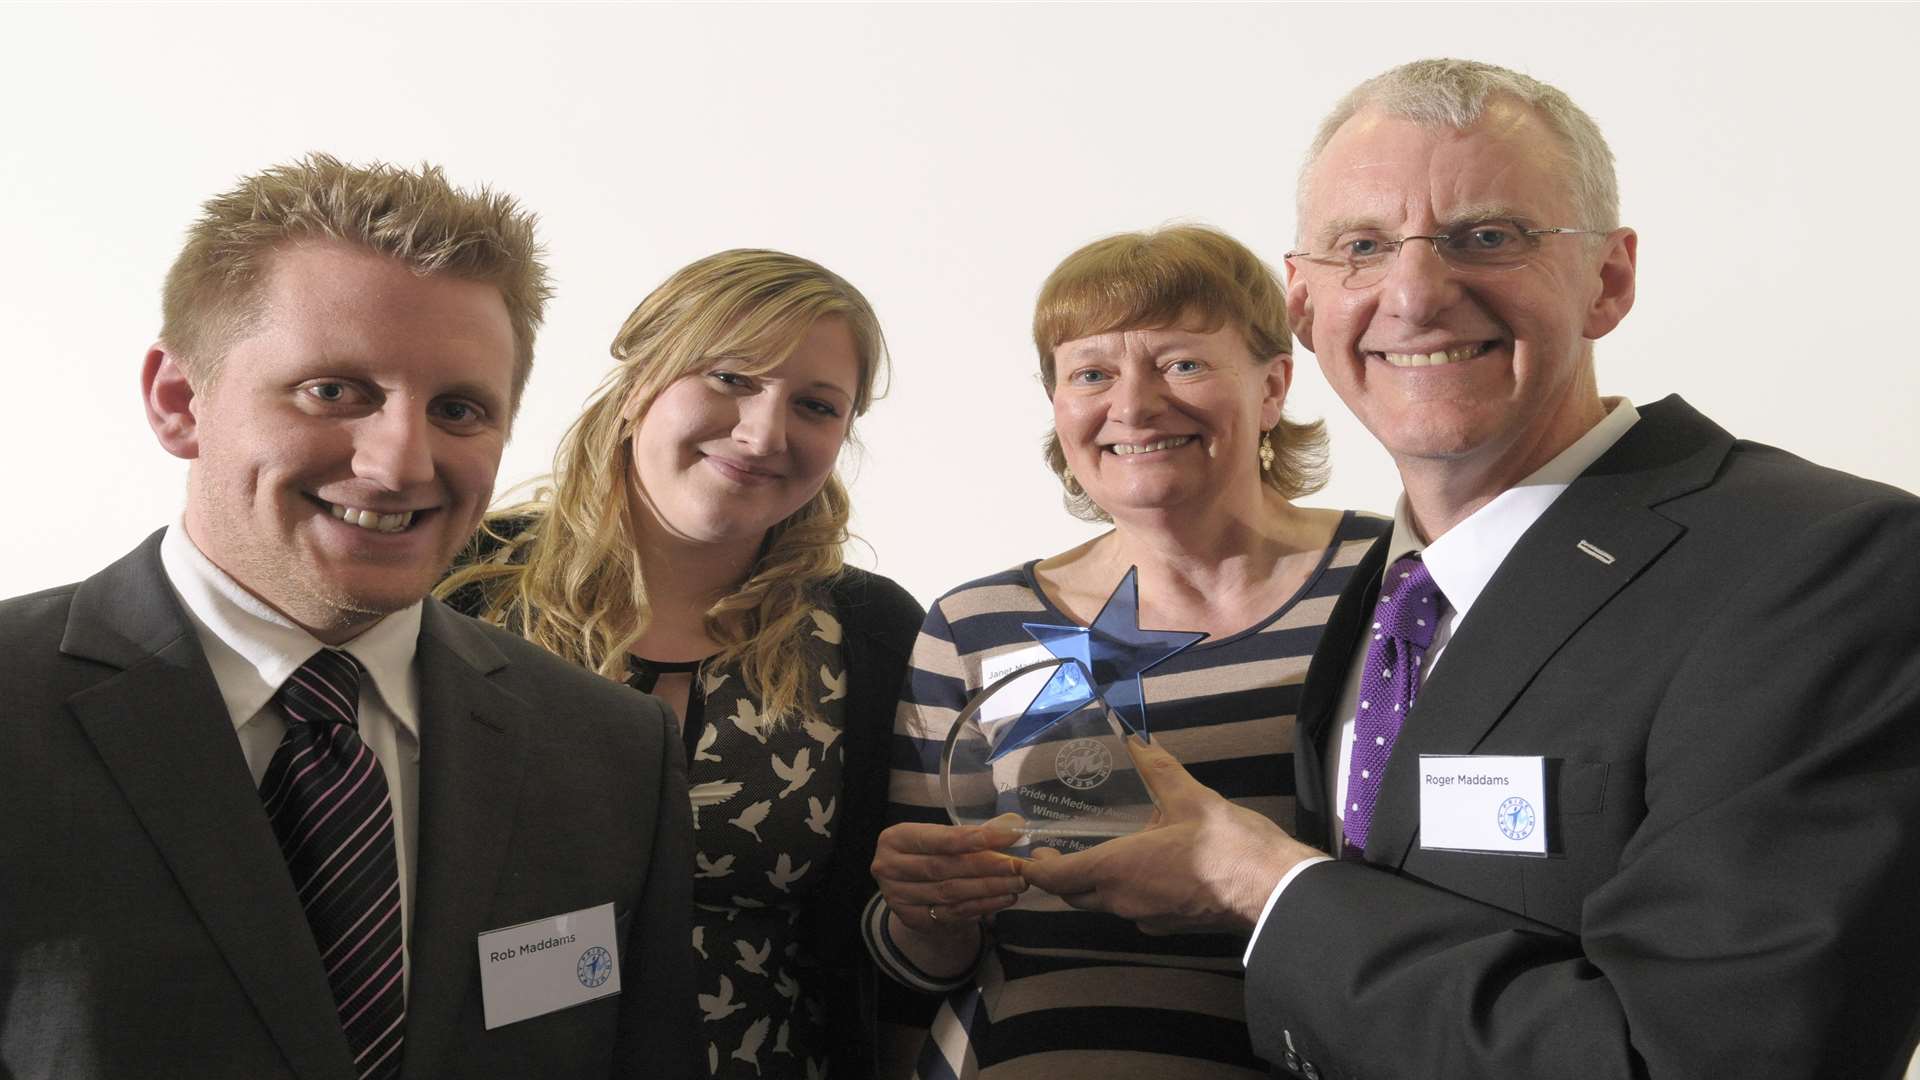 Last year's Pride in Medway winners Janet and Roger Maddams with their son Rob Maddams and his partner Anna Rigby.